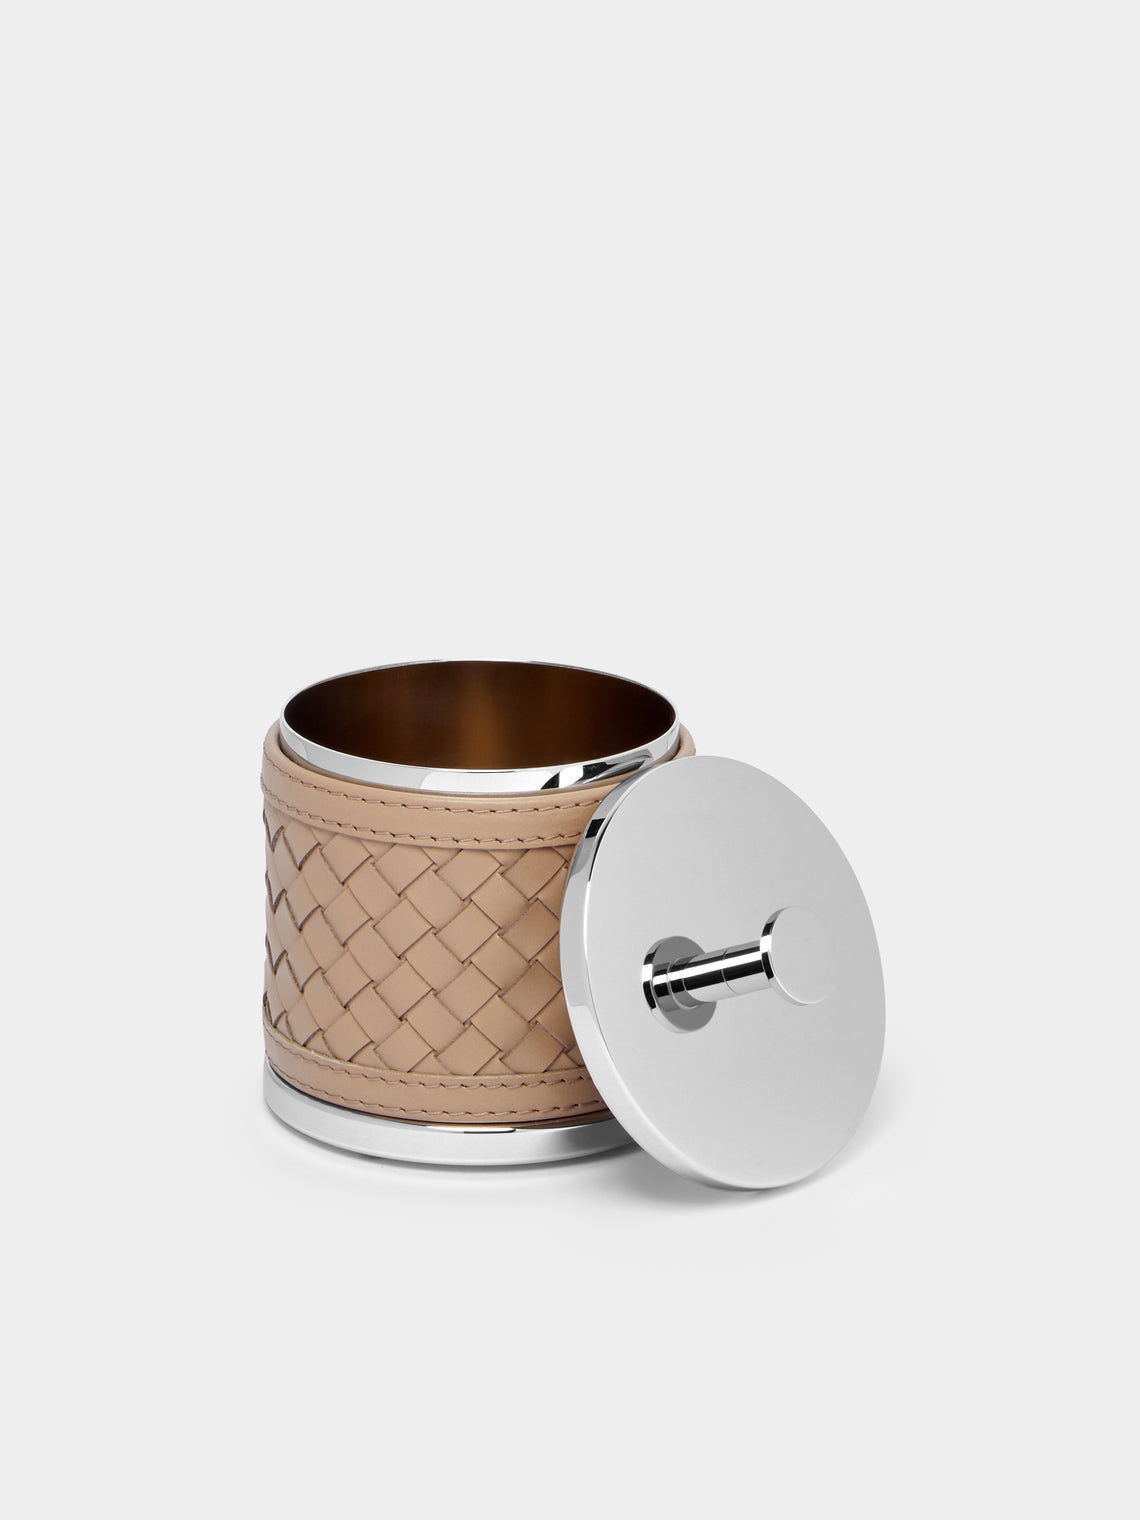 Riviere - Woven Leather Lidded Box -  - ABASK